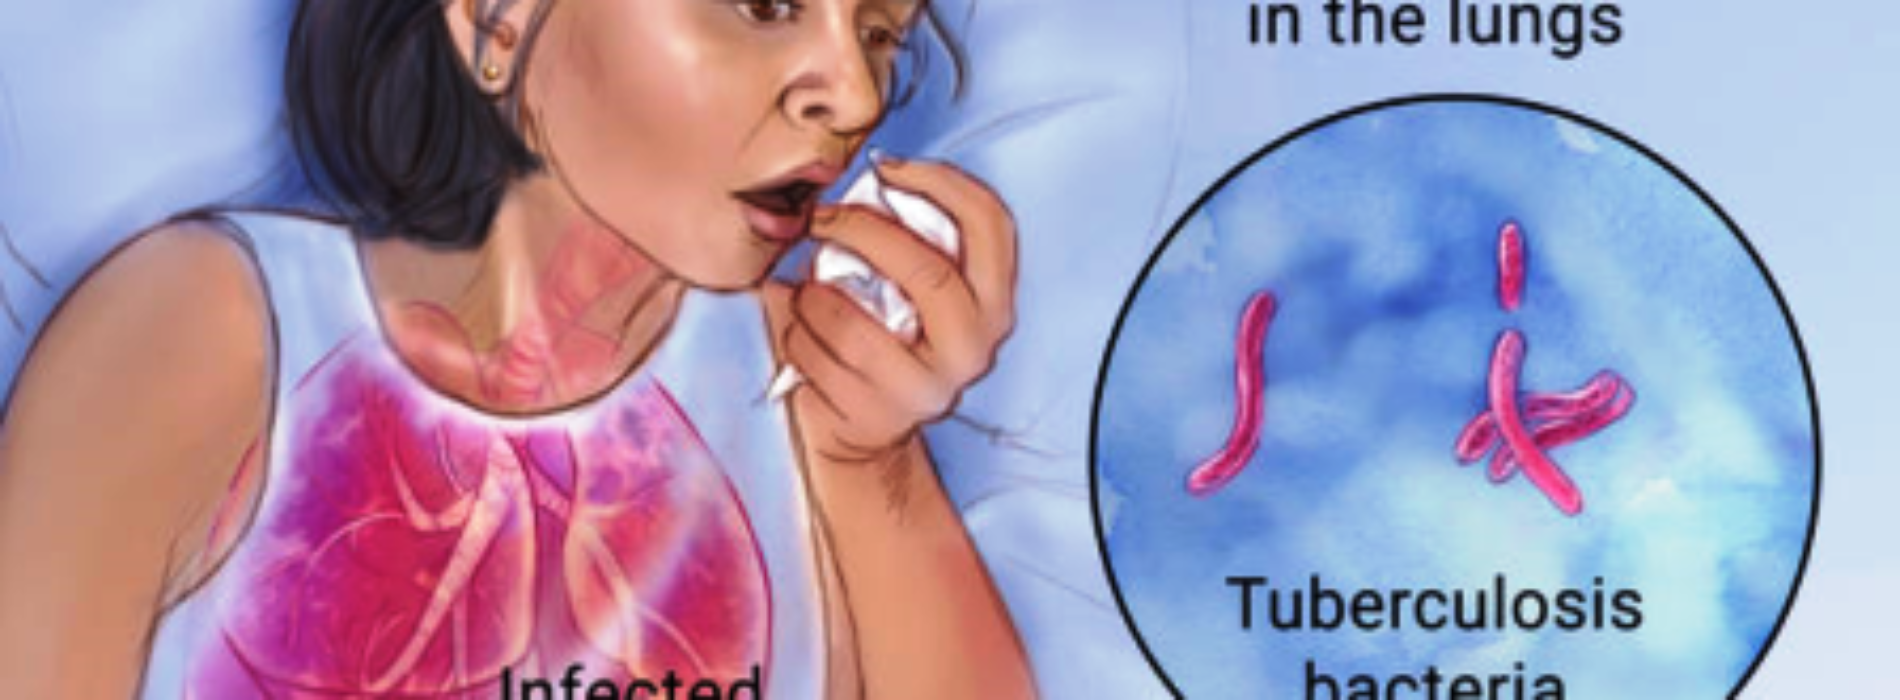 Neglecting TB while fighting COVID-19 portends danger – Experts warn